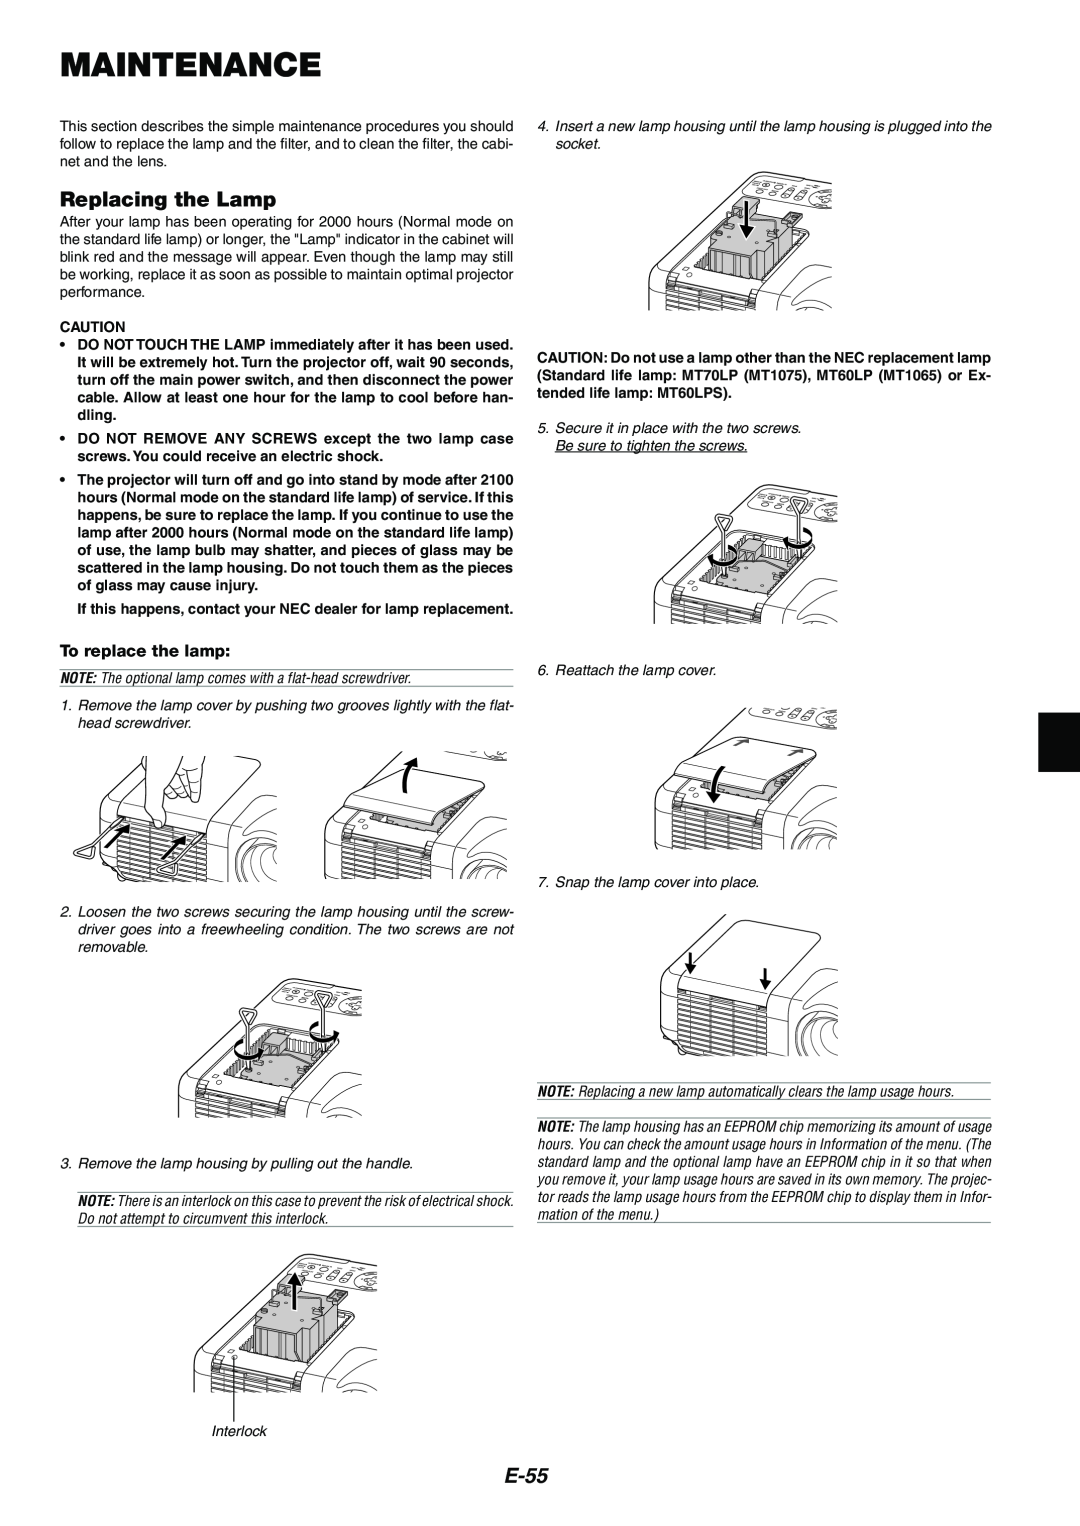 NEC MT1075/MT1065 user manual Maintenance, Replacing the Lamp, E-55, To replace the lamp, tended life lamp: MT60LPS 